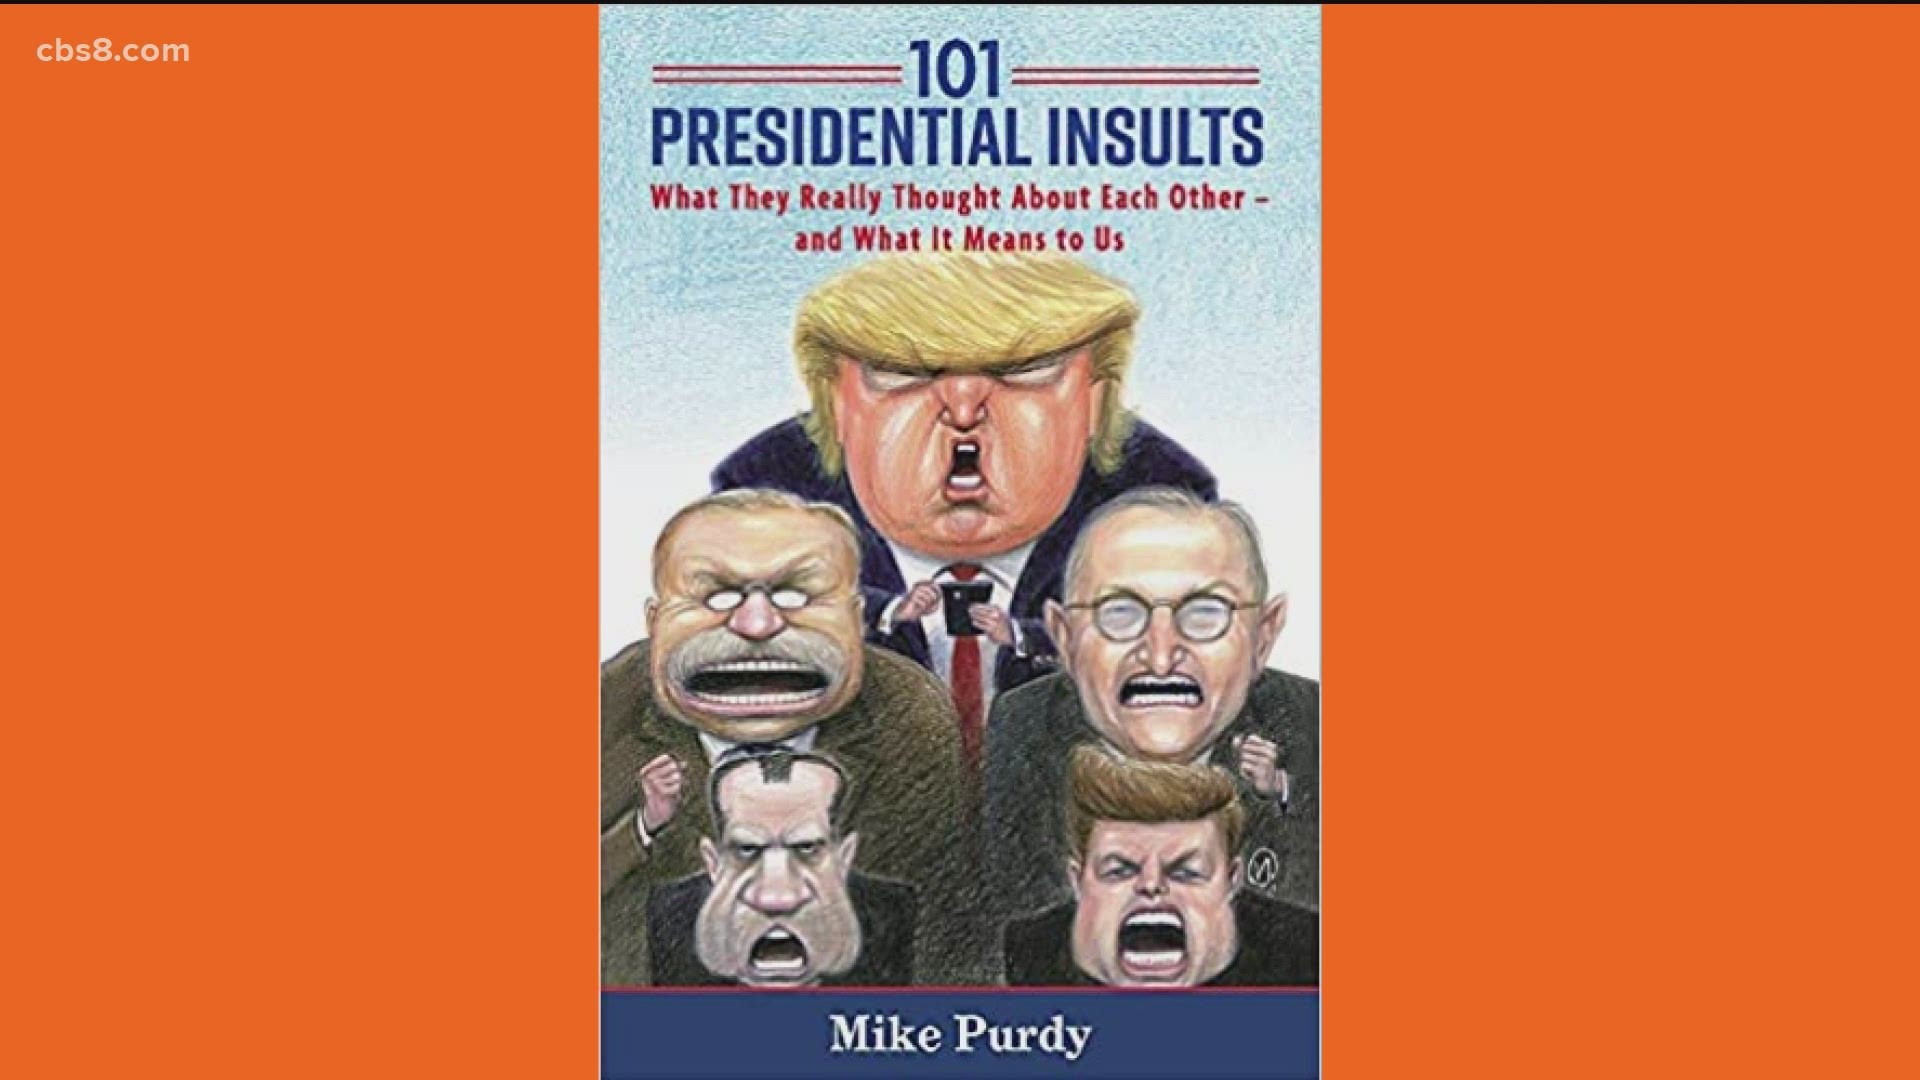 Mike Purdy, author of '101 Presidential Insults: What They Really Thought About Each Other and What it Means to Us', gives us a history lesson.